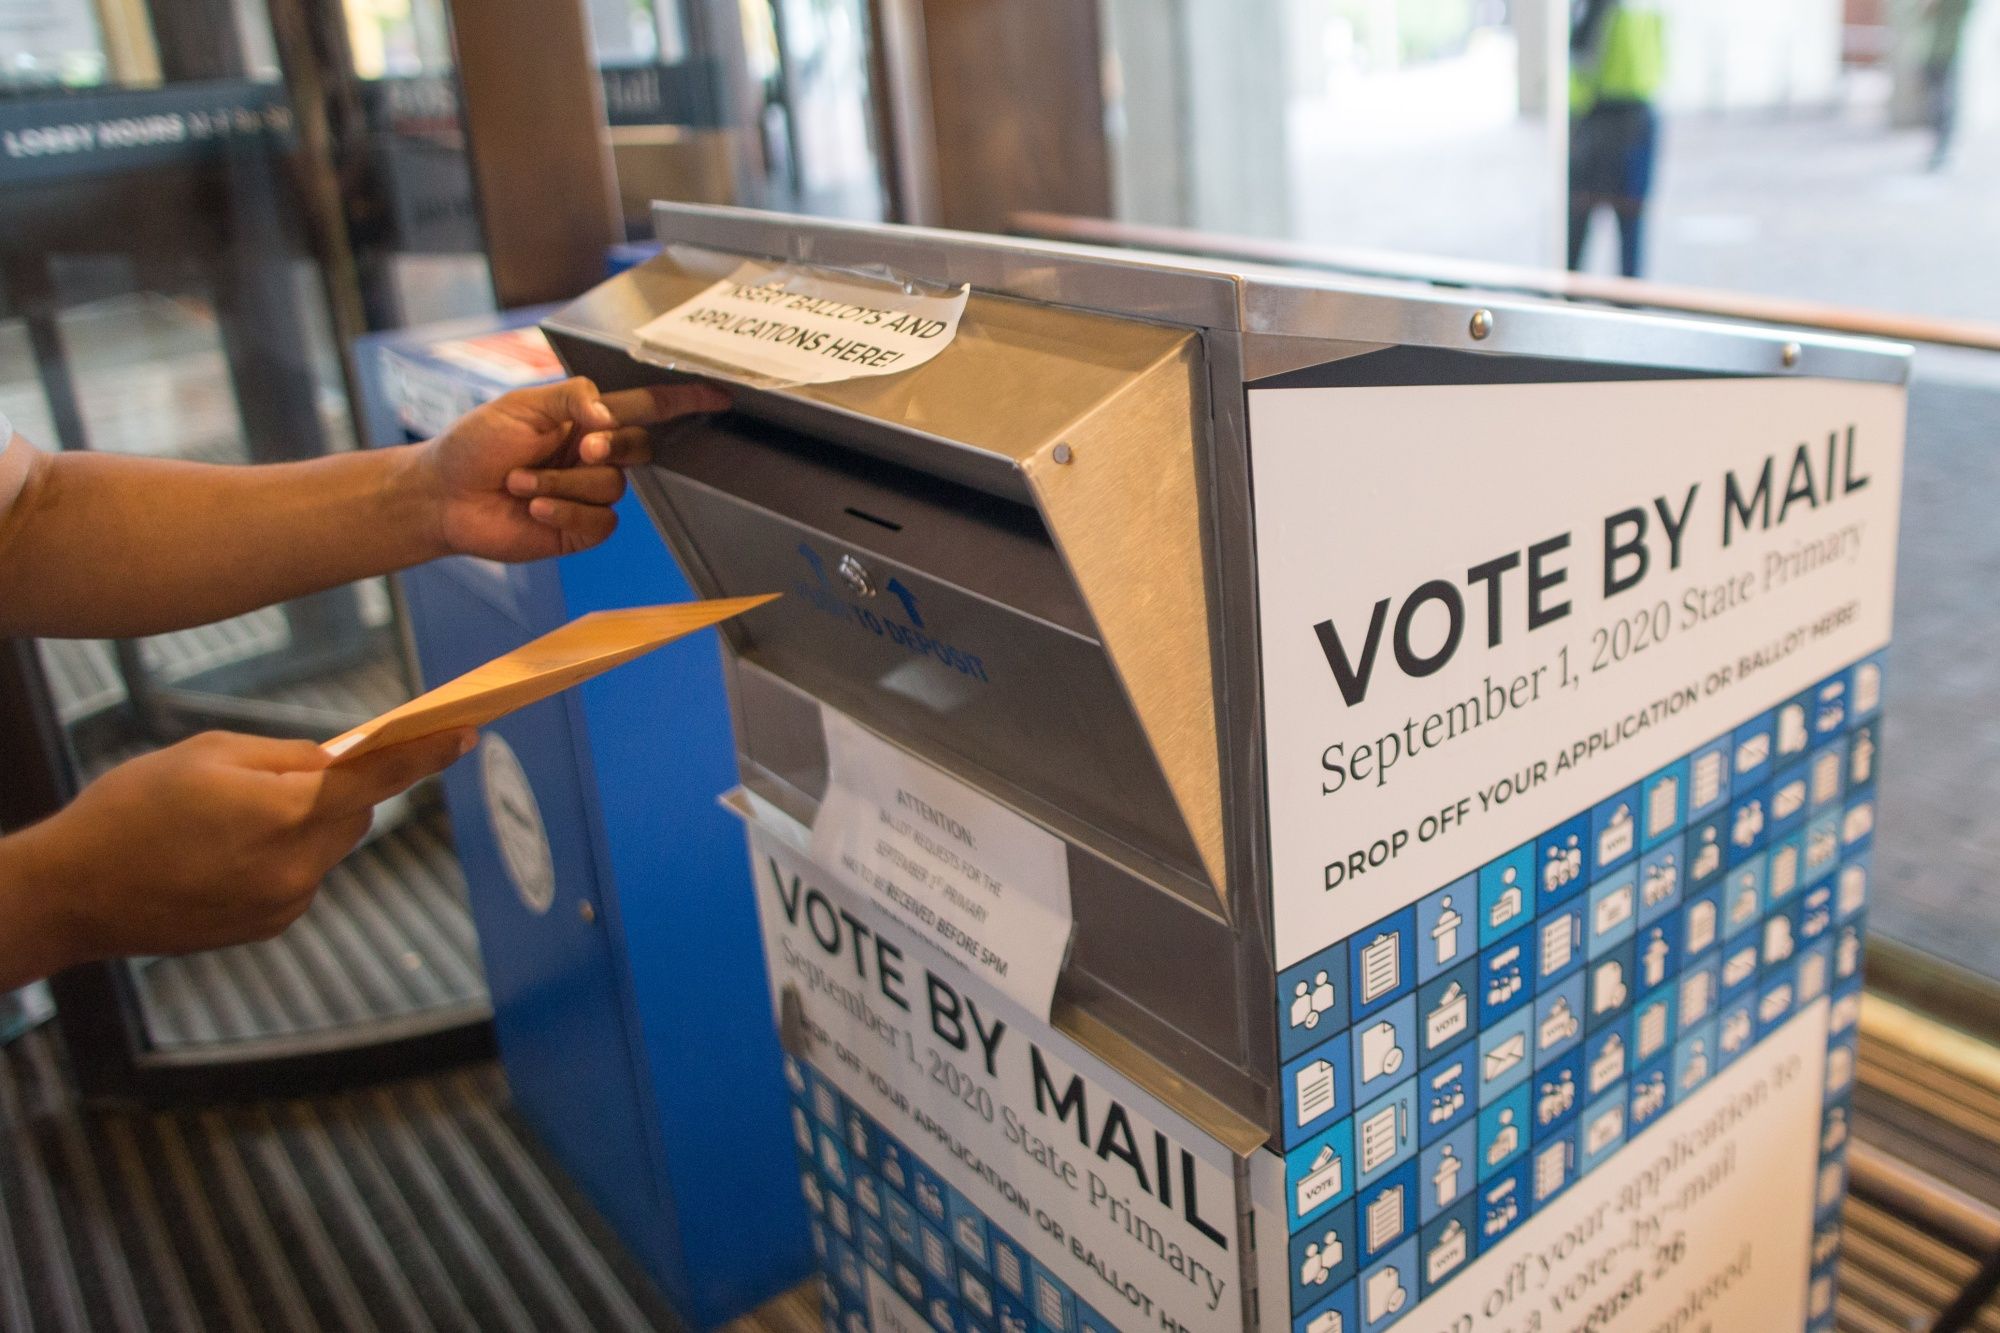 A voter casts a ballot for a different election at a vote-by-mail dropbox at Boston City Hall.